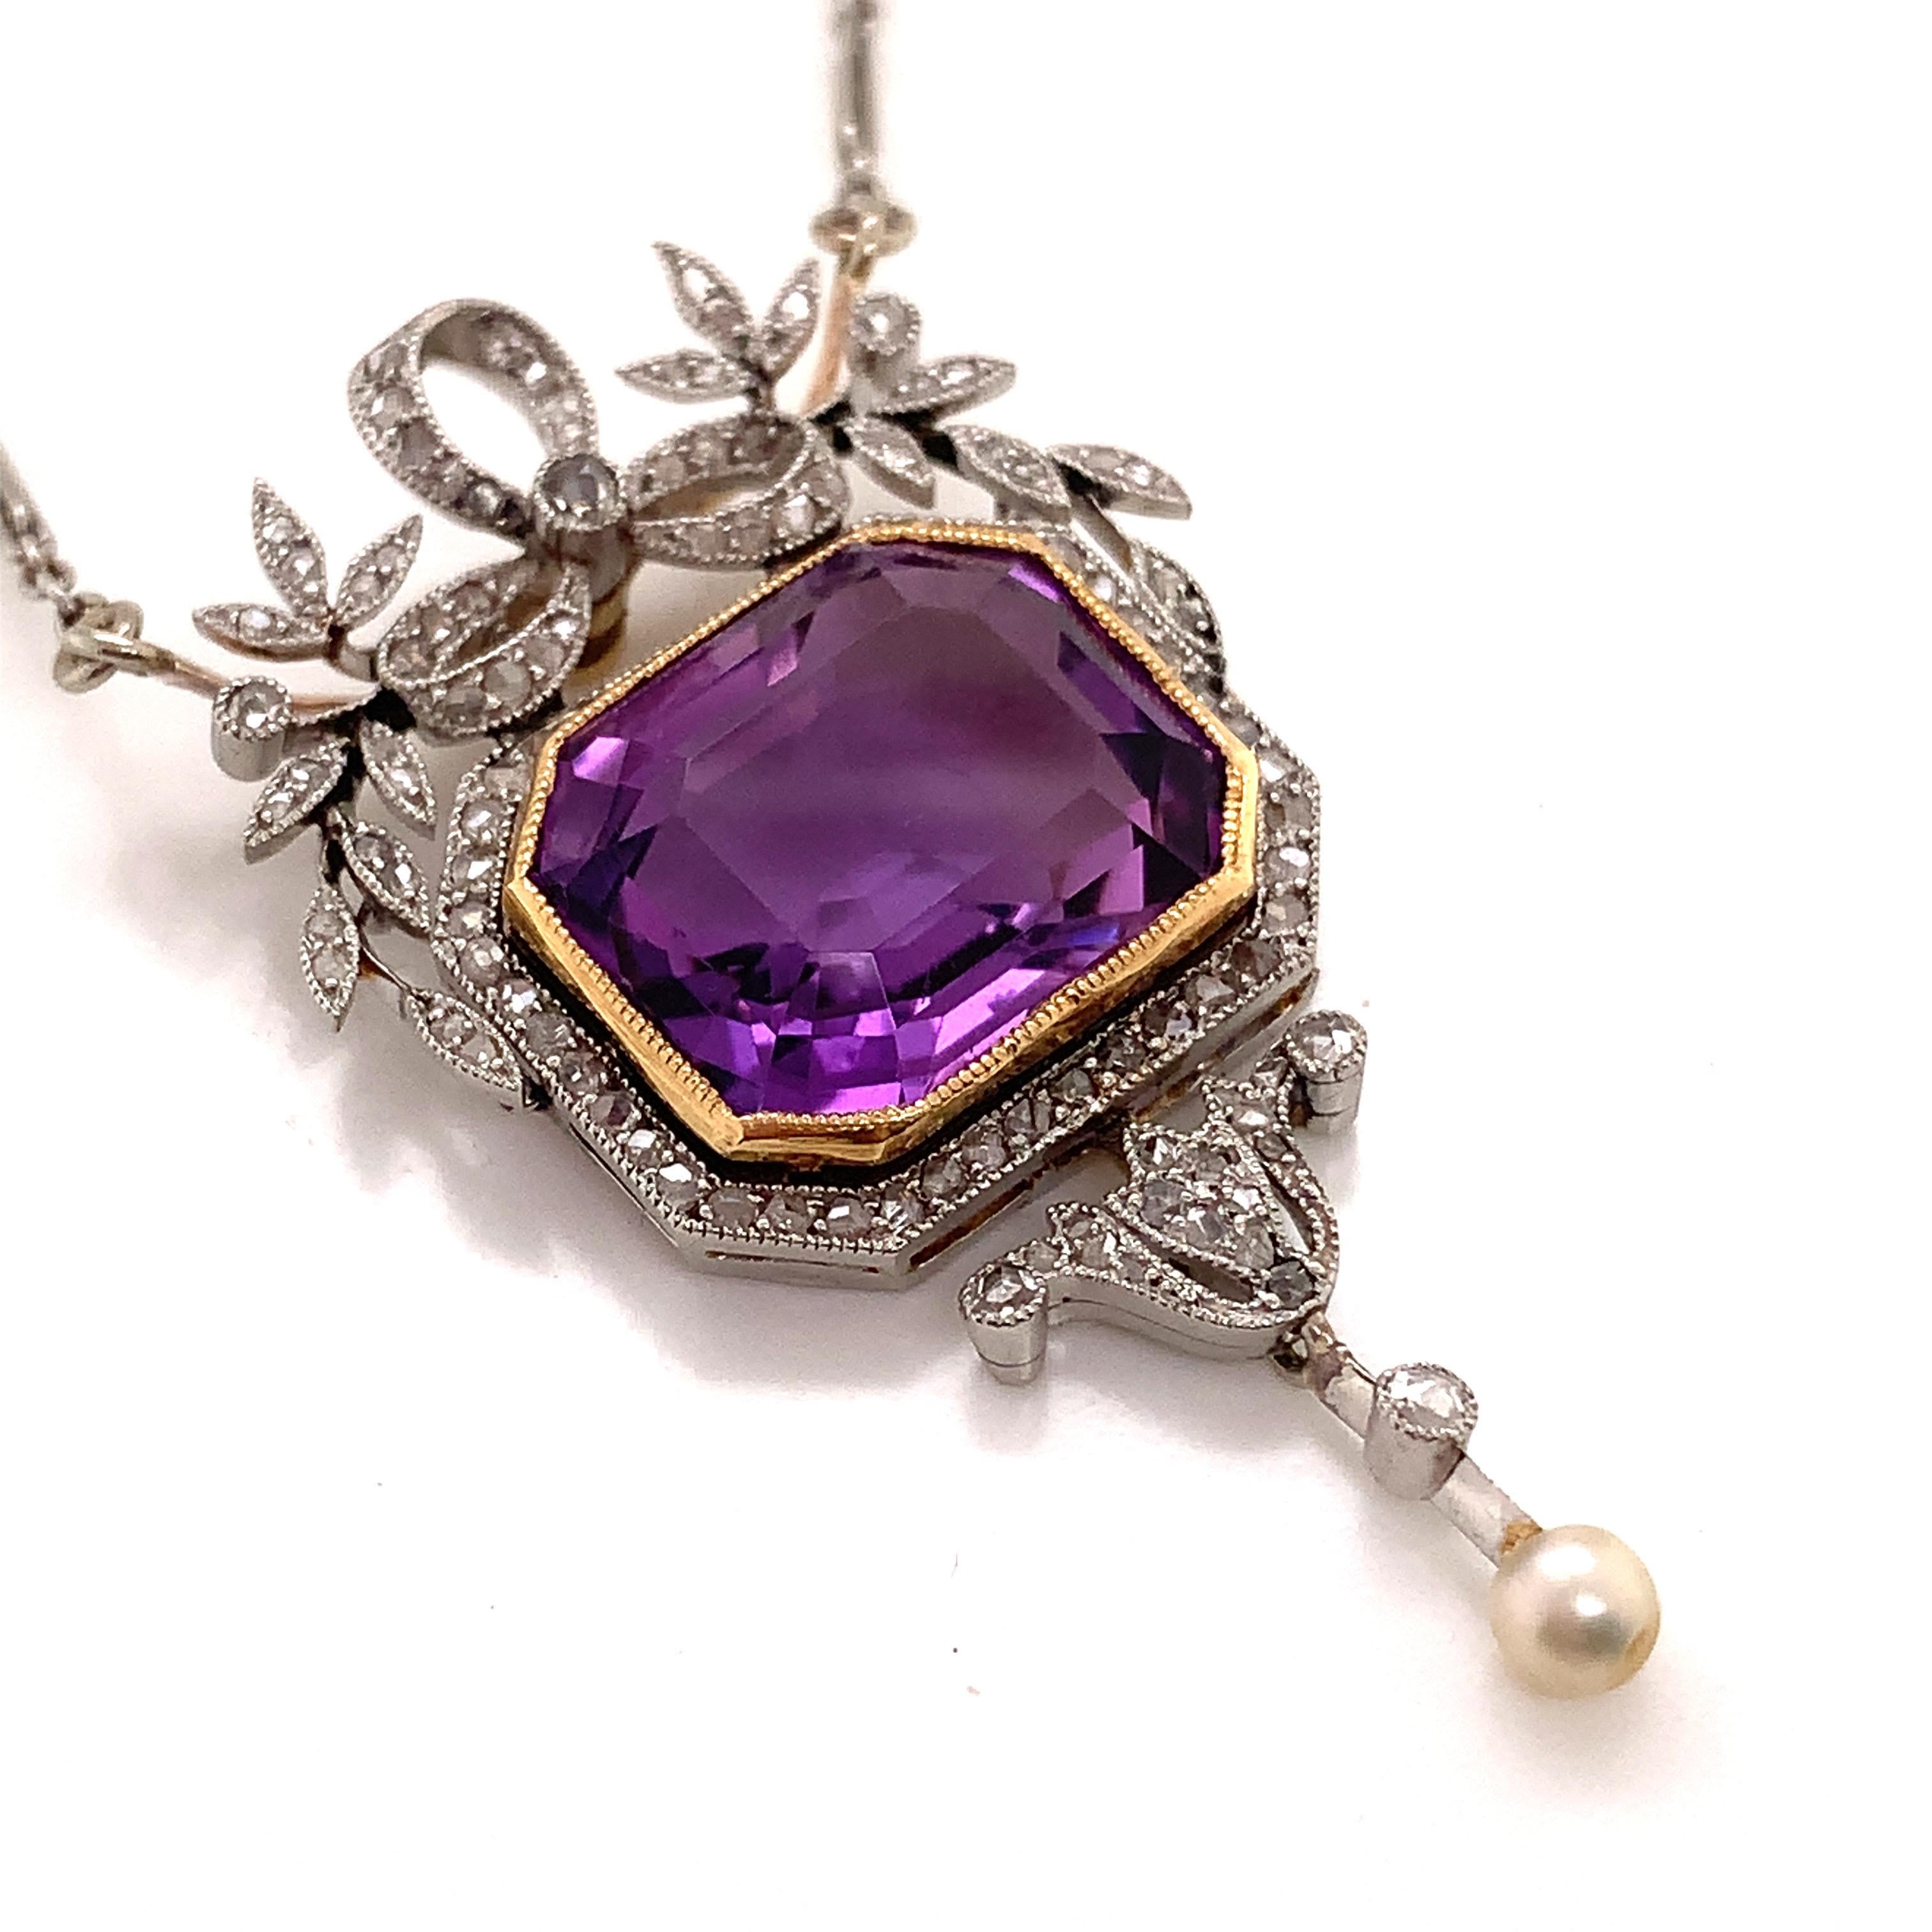 Edwardian platinum diamond and amethyst pendant necklace 
weight 13.8g 
size 4.5*2.5cm without chain  
amethyst size: 1.5*1.3cm 
chain length 21cm*2